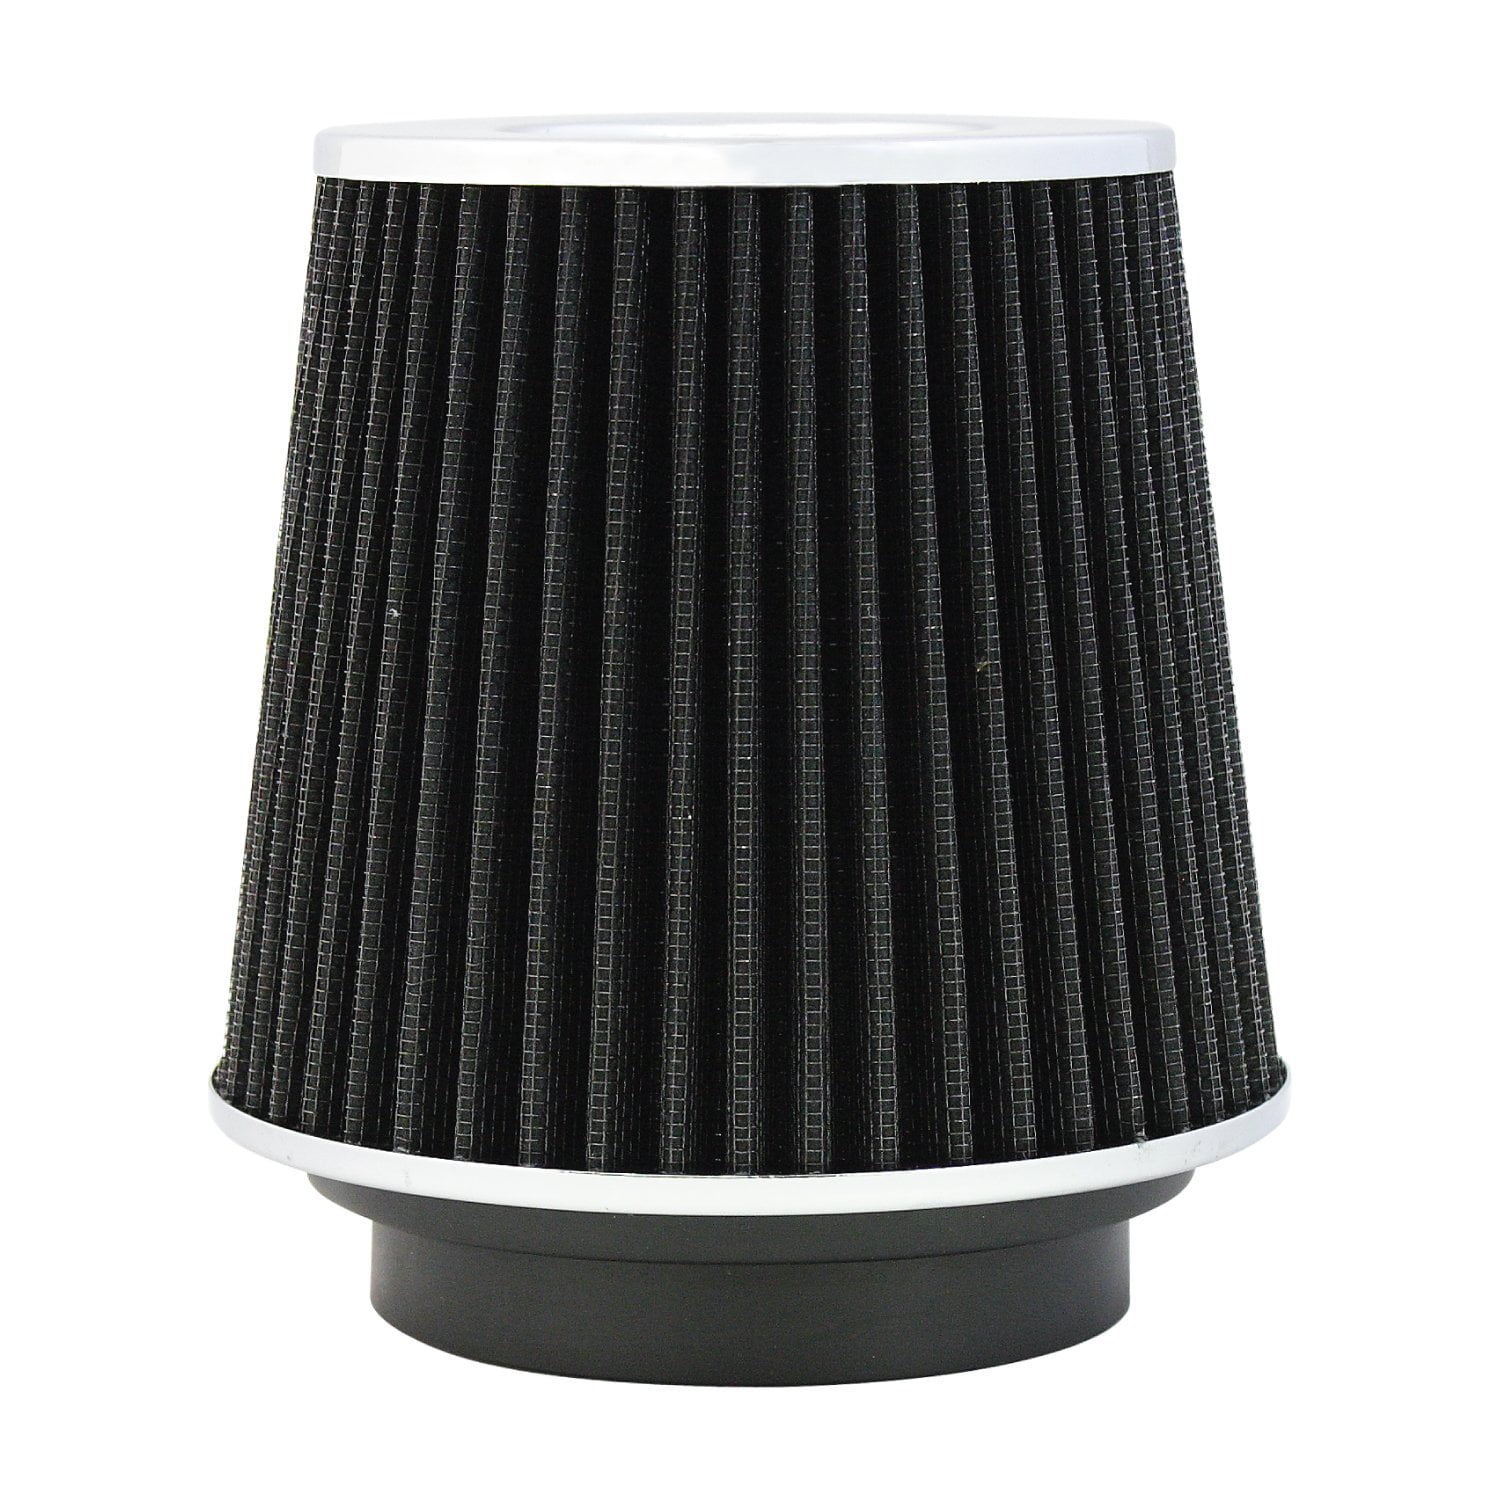 Madlife Garage Universal Car Air Filter High Power Sports Mesh Cone Air Intake Filter Chrome Finish for Car Automobile Racing